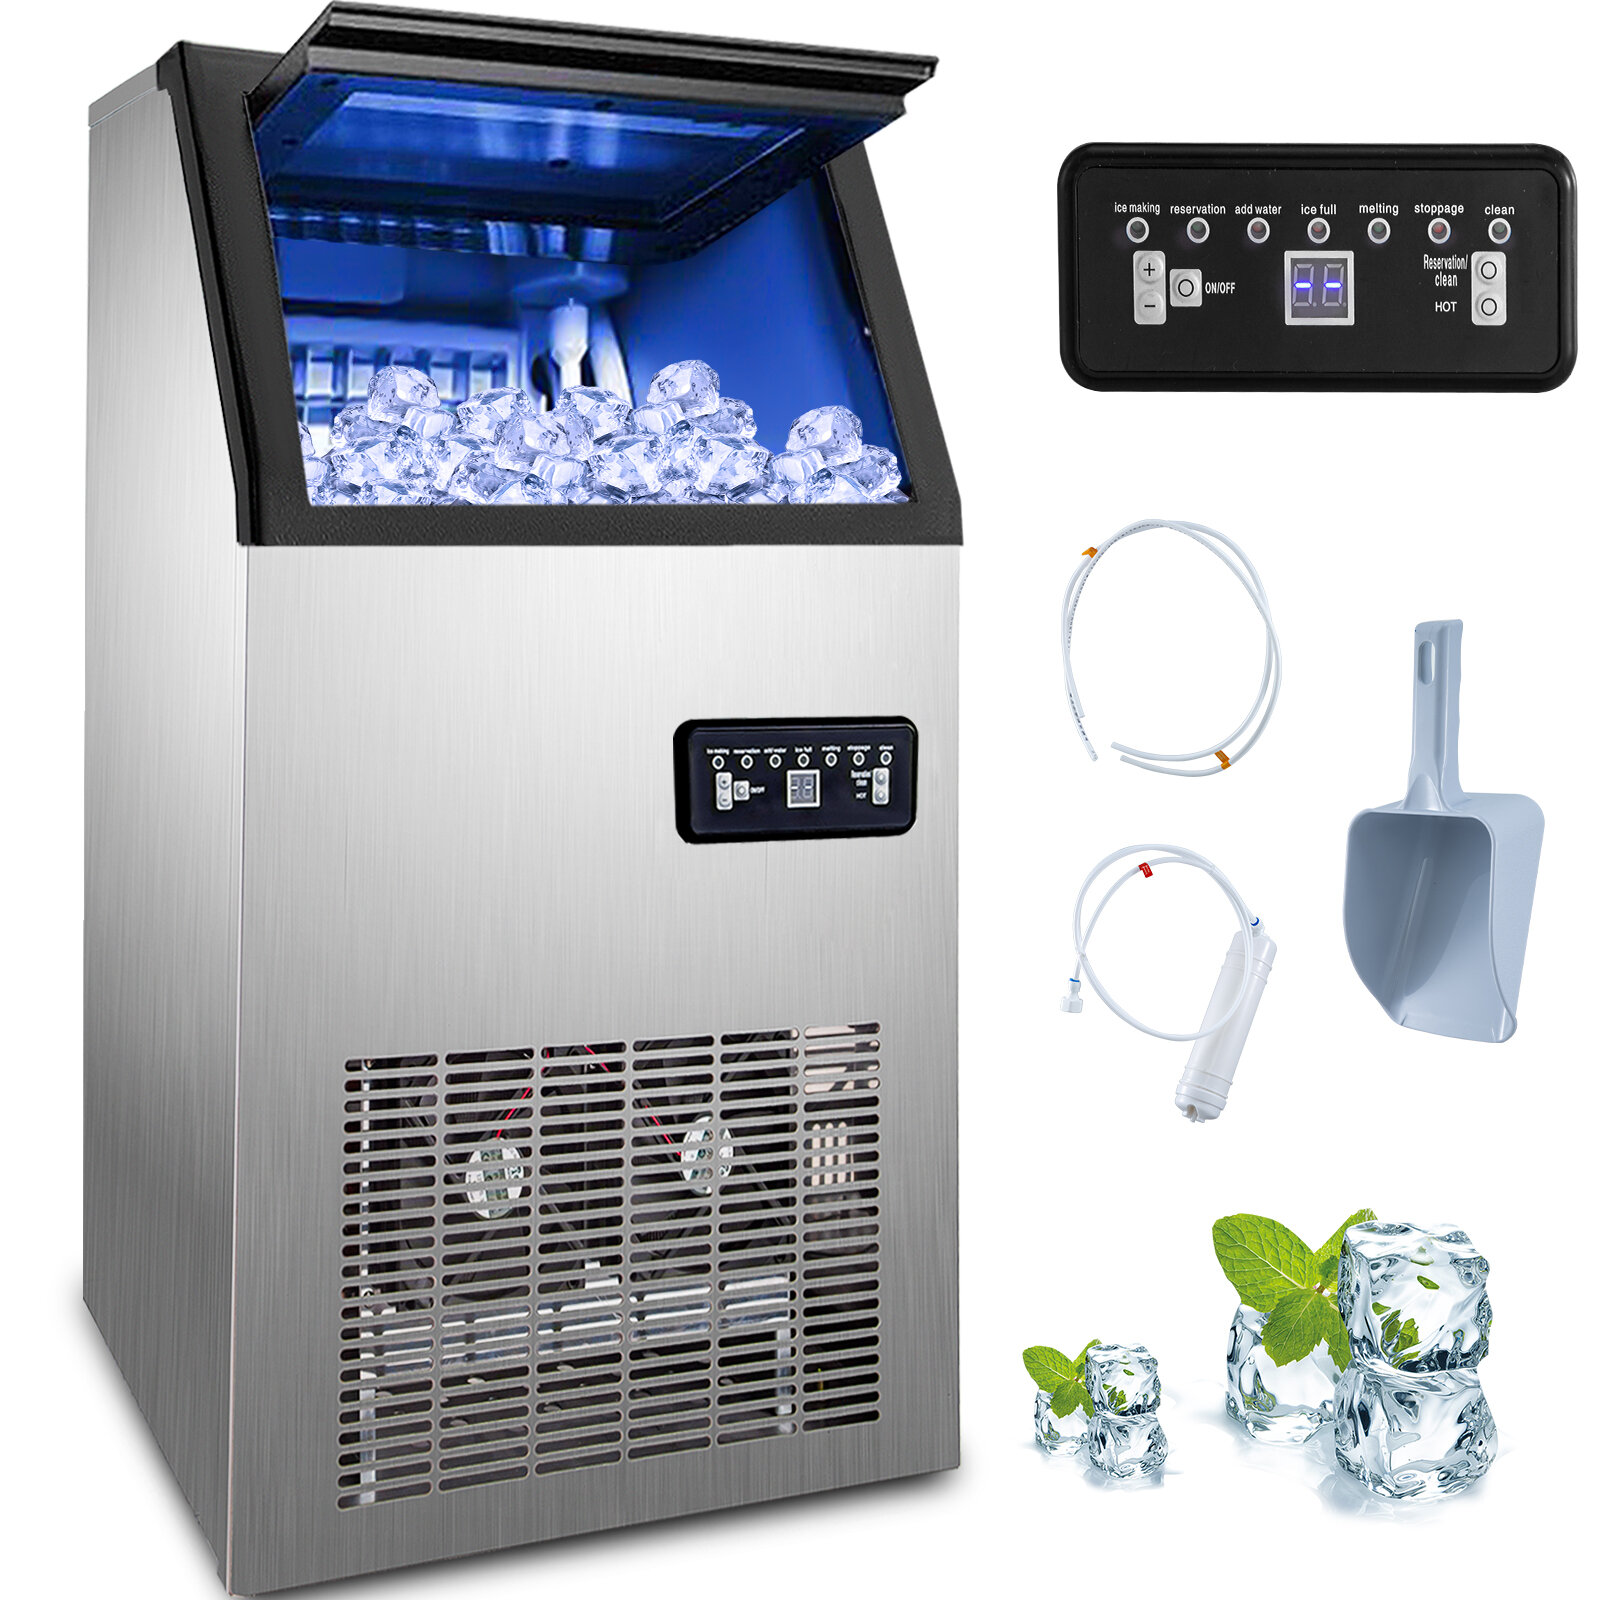 How do you clean a commercial ice machine?